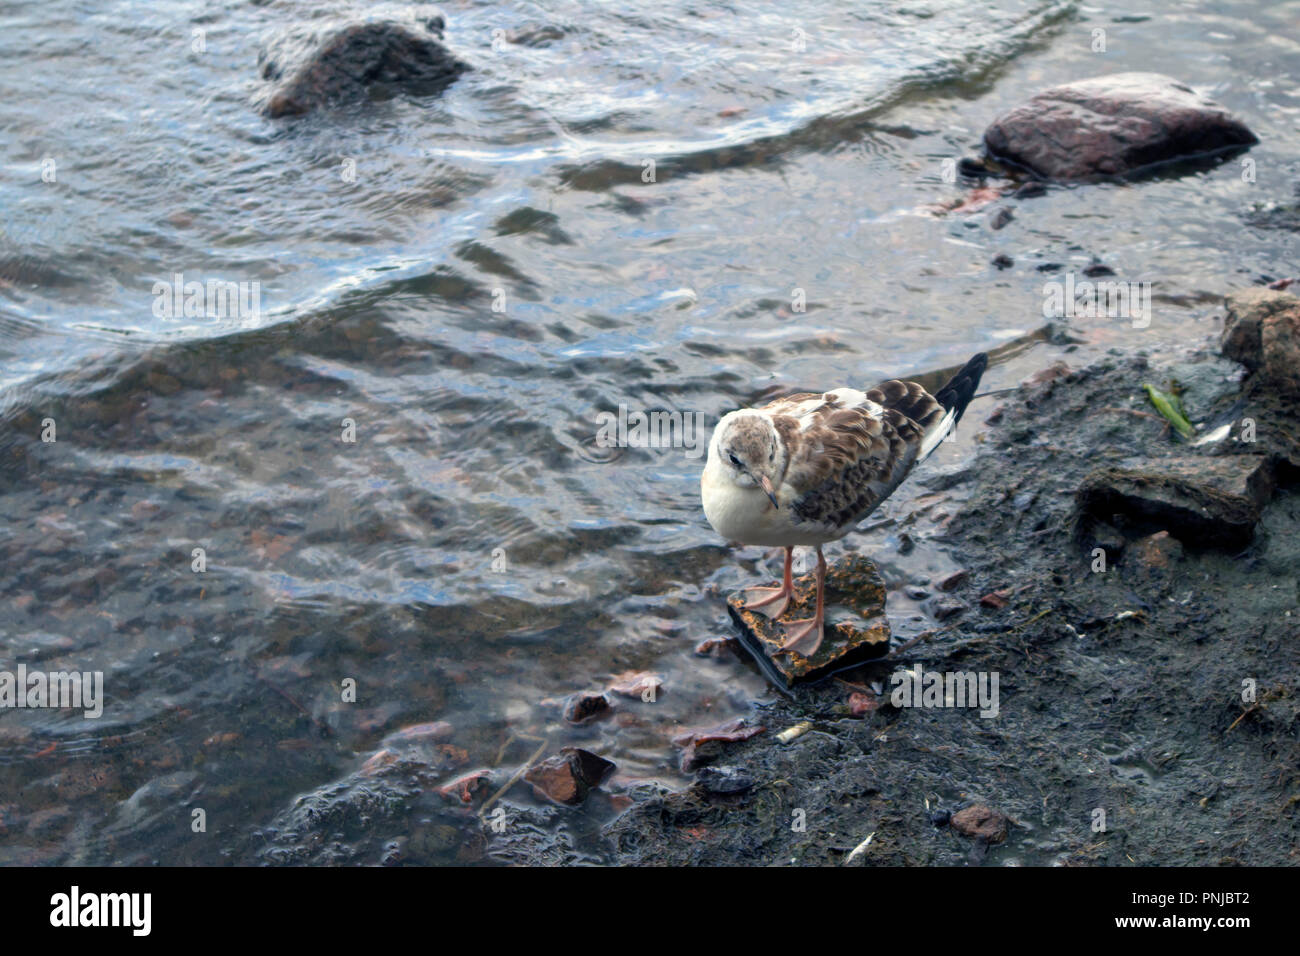 Cute young seagull staying in a transparent water on a stony oozed sea shore Stock Photo